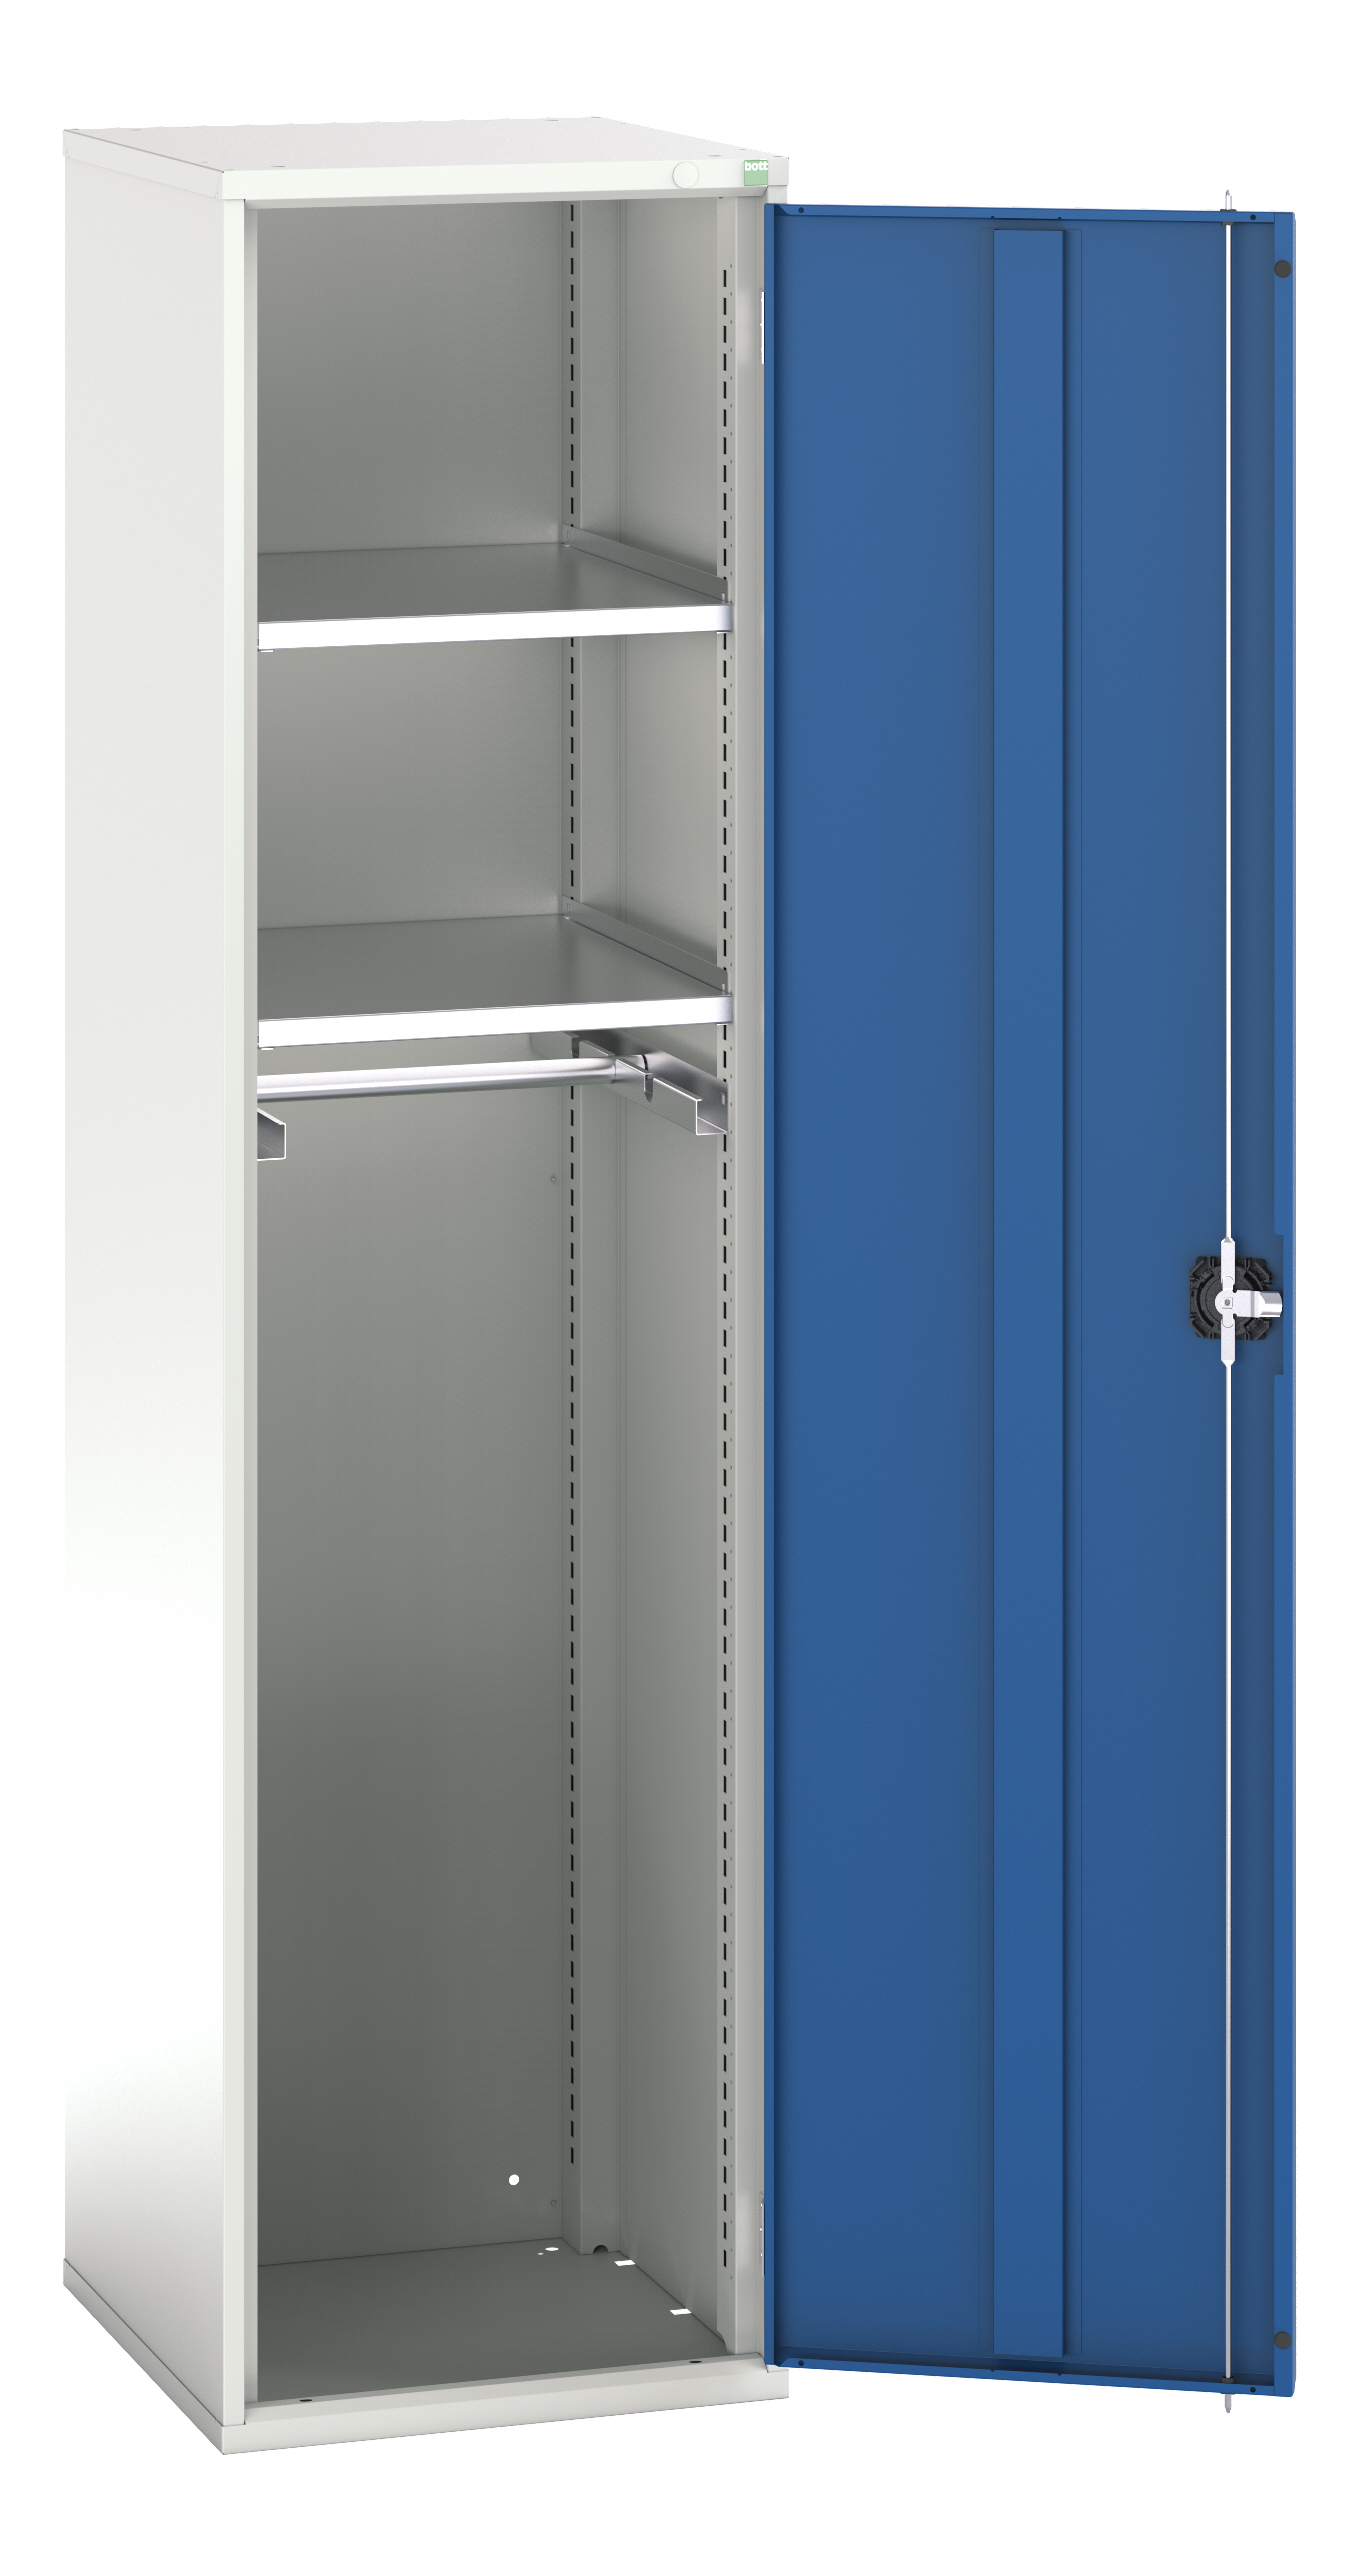 Bott Verso Ppe / Janitorial Kitted Cupboard - 16926351.11